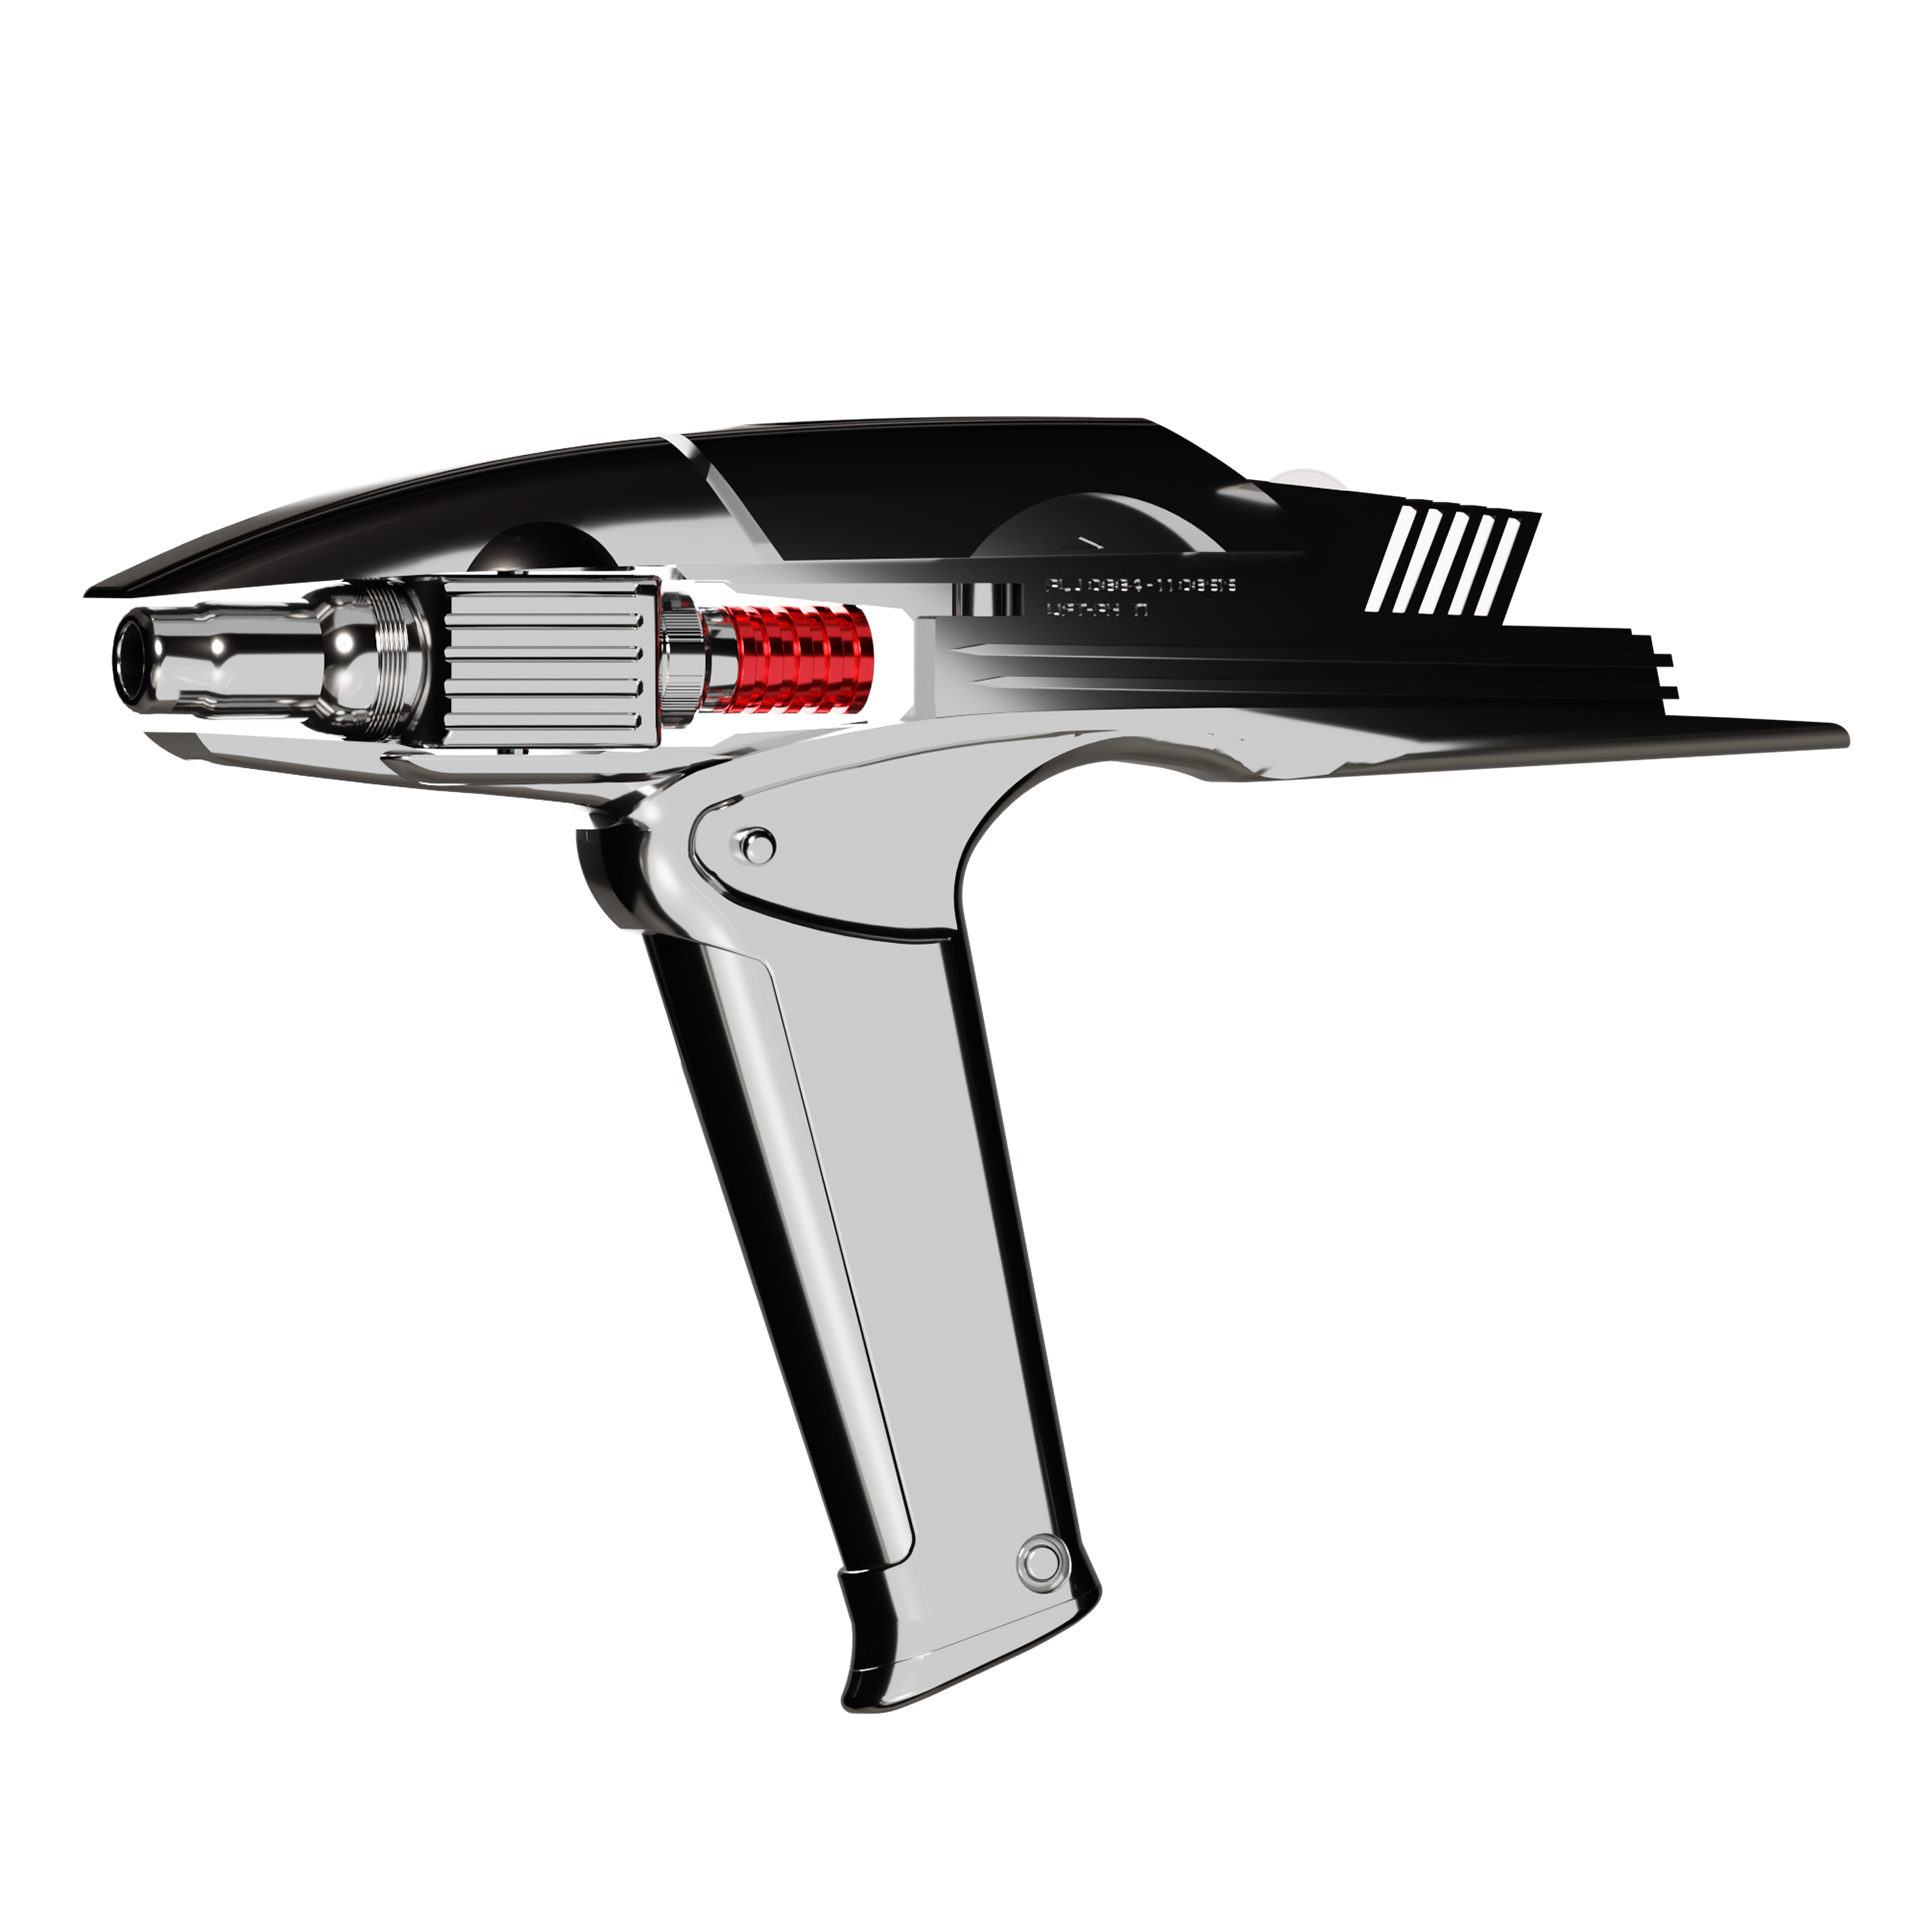 Into Darkness Star Trek 2009 Phaser Cosplay 3d printed with moving parts and LED lighting 